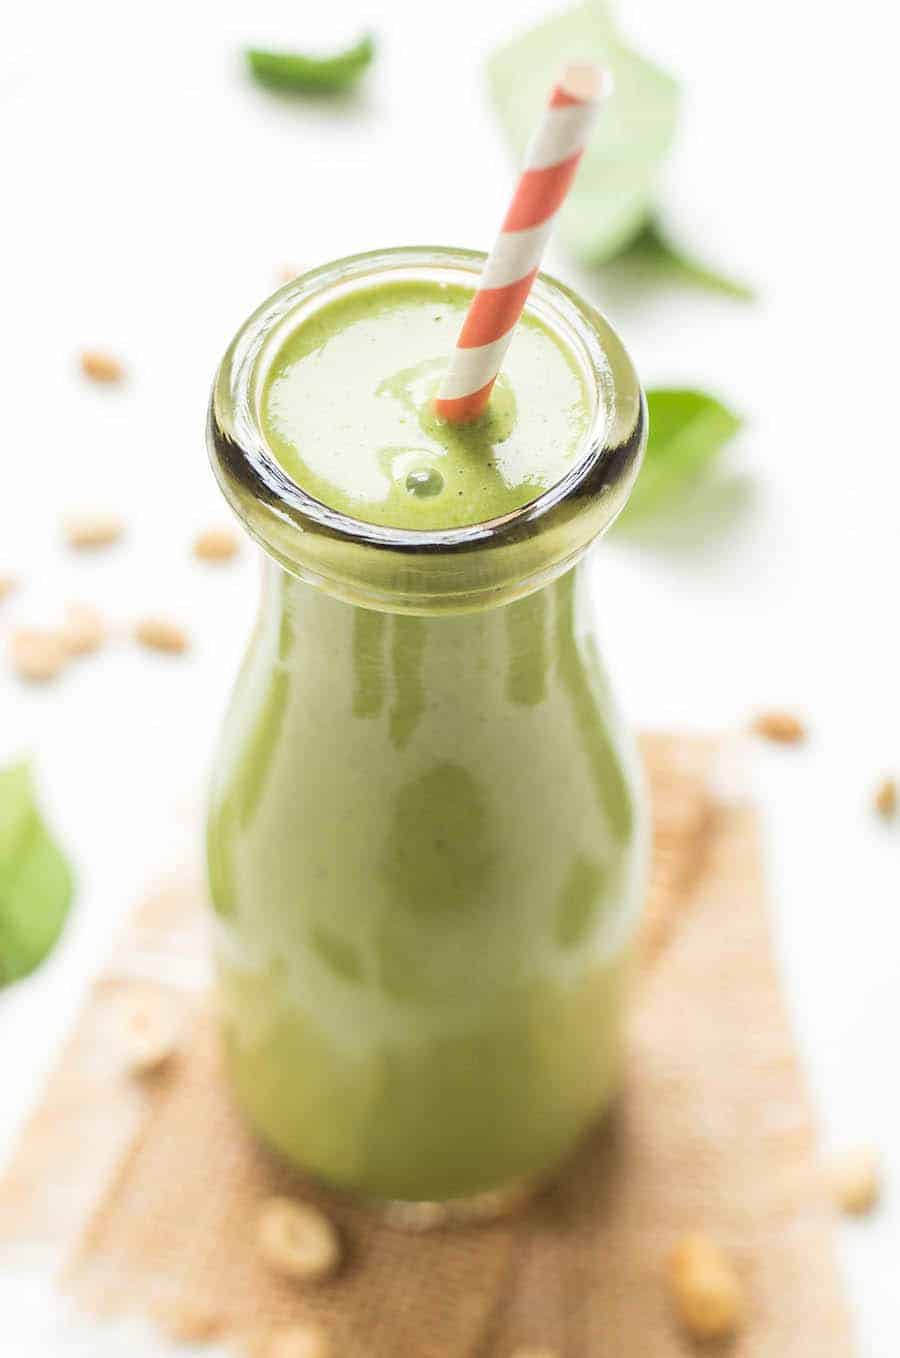 PEANUT BUTTER GREEN SMOOTHIE -- with peanut butter, spinach and frozen banana for the creamiest, dreamiest smoothie!